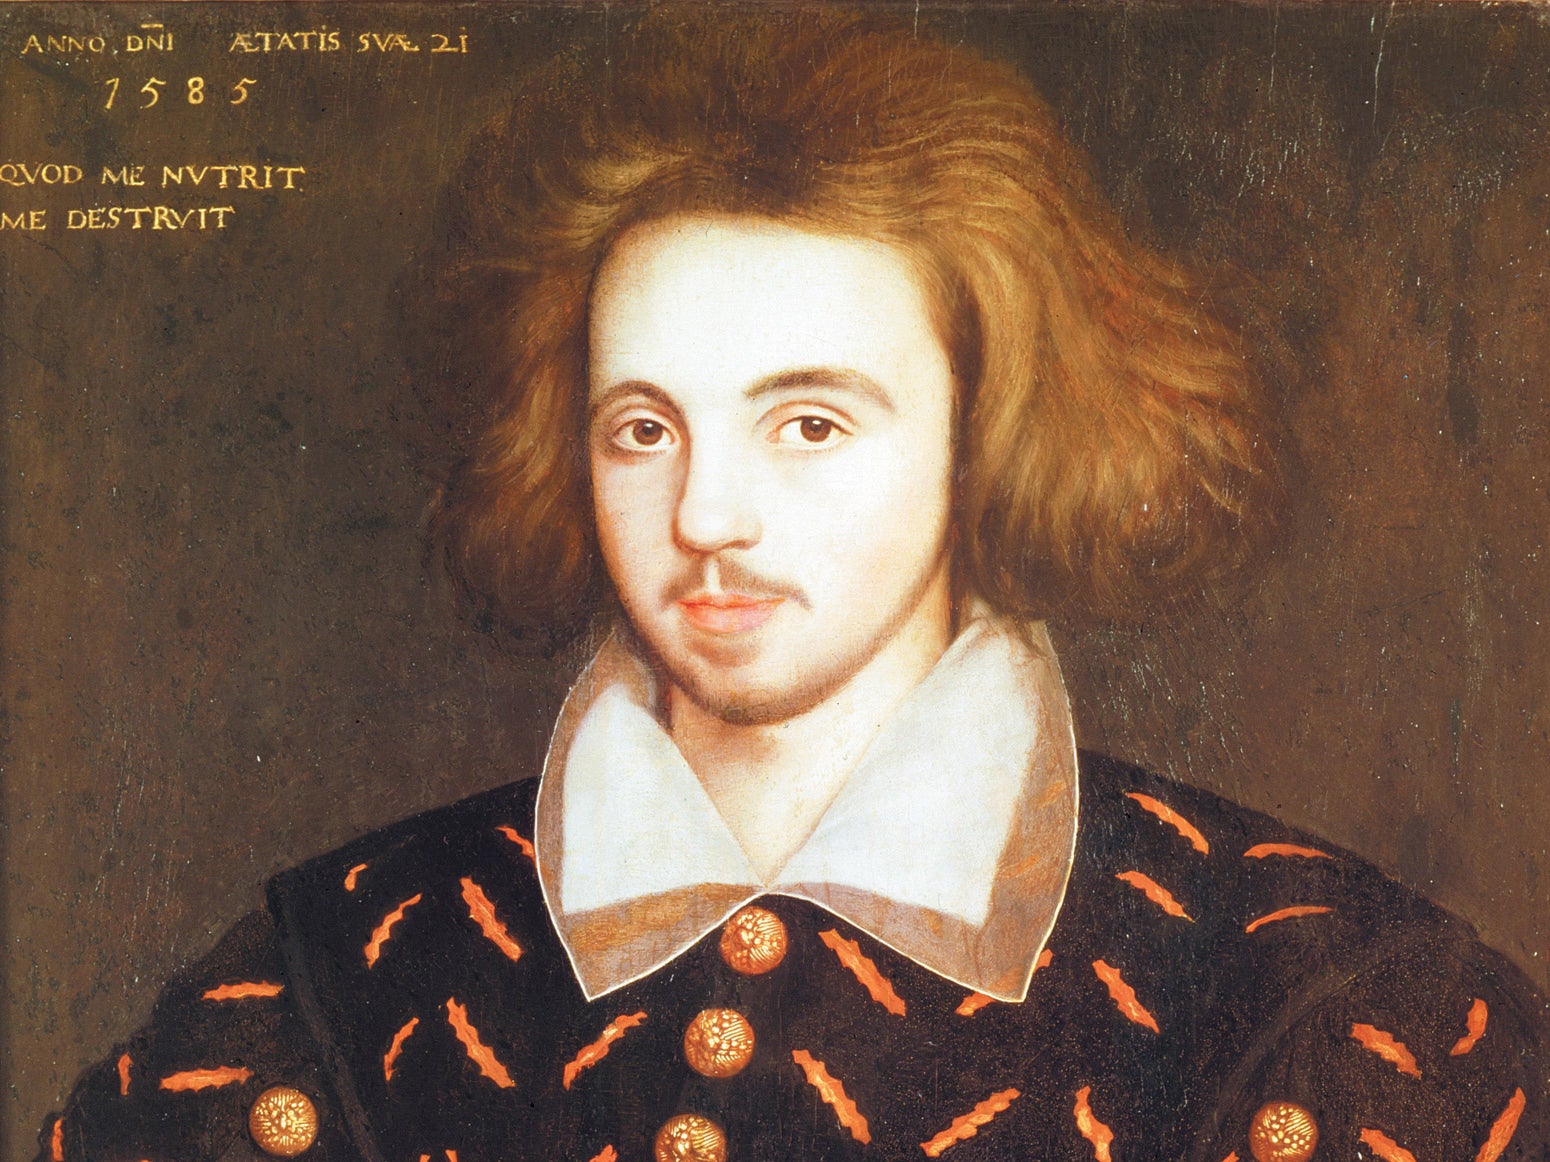 Marlowe was recruited while studying at Cambridge